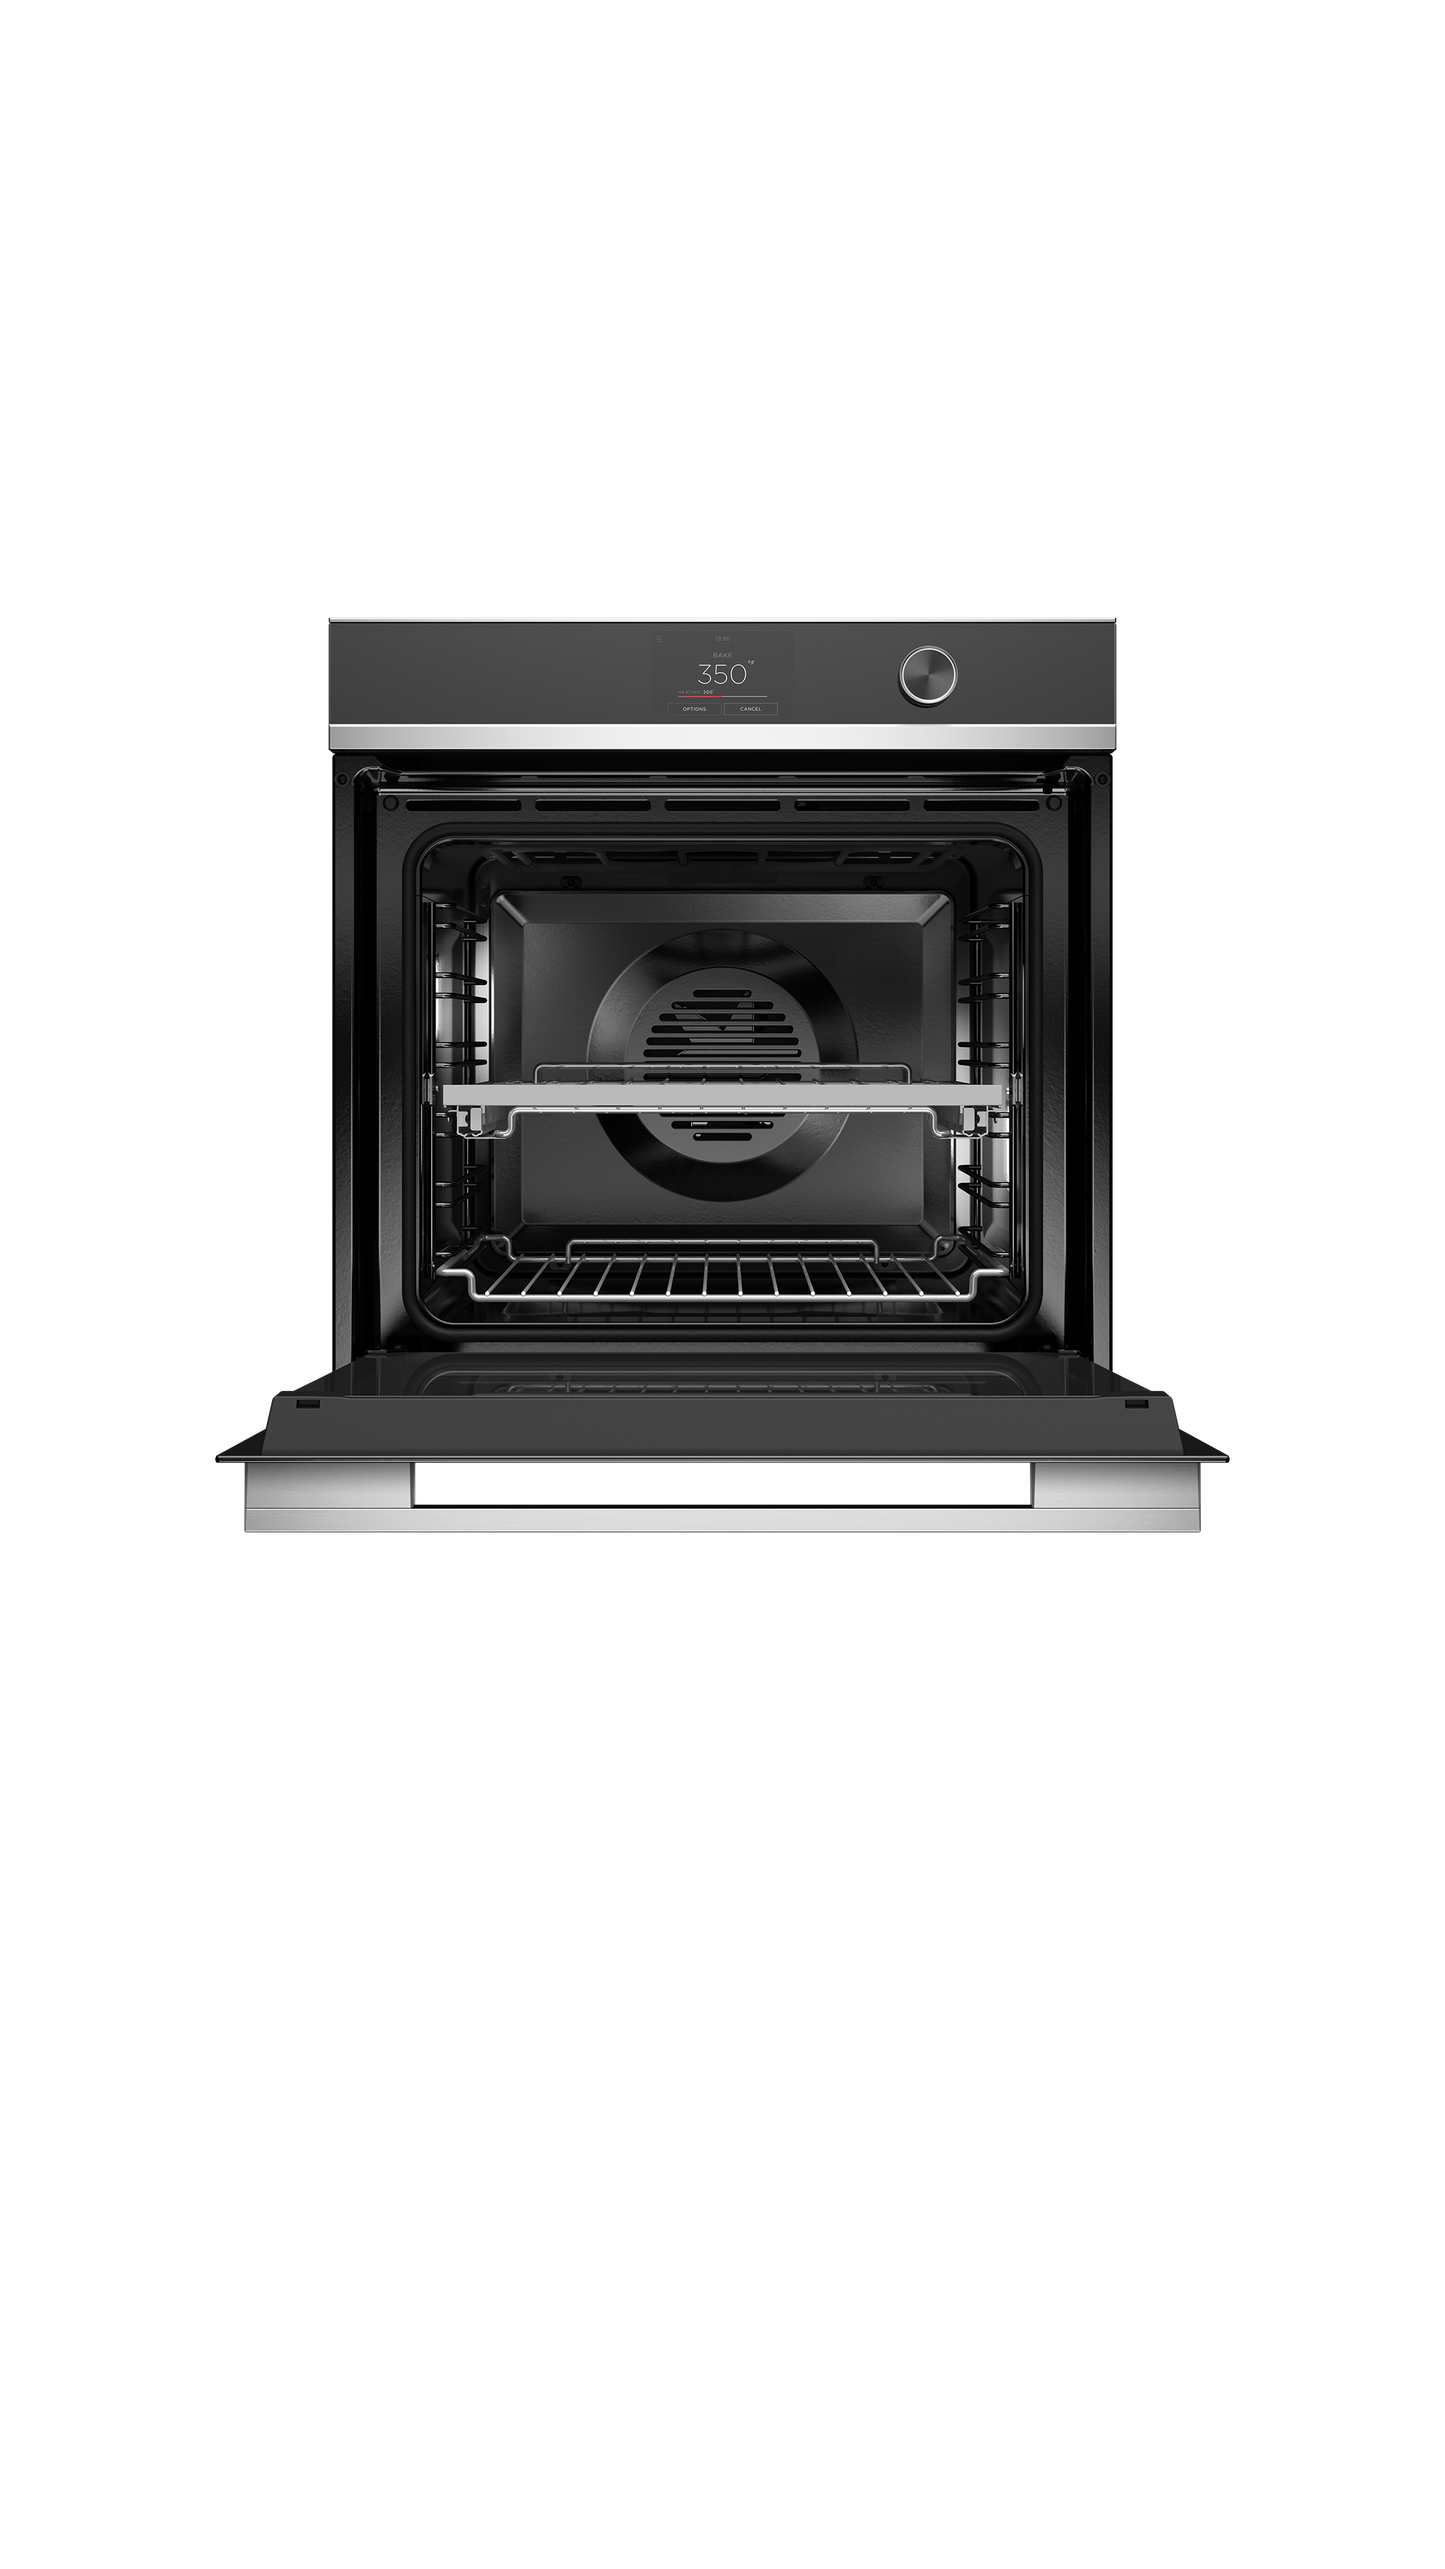 Oven, 24", 16 Function, Self-cleaning, 84-mug-closed